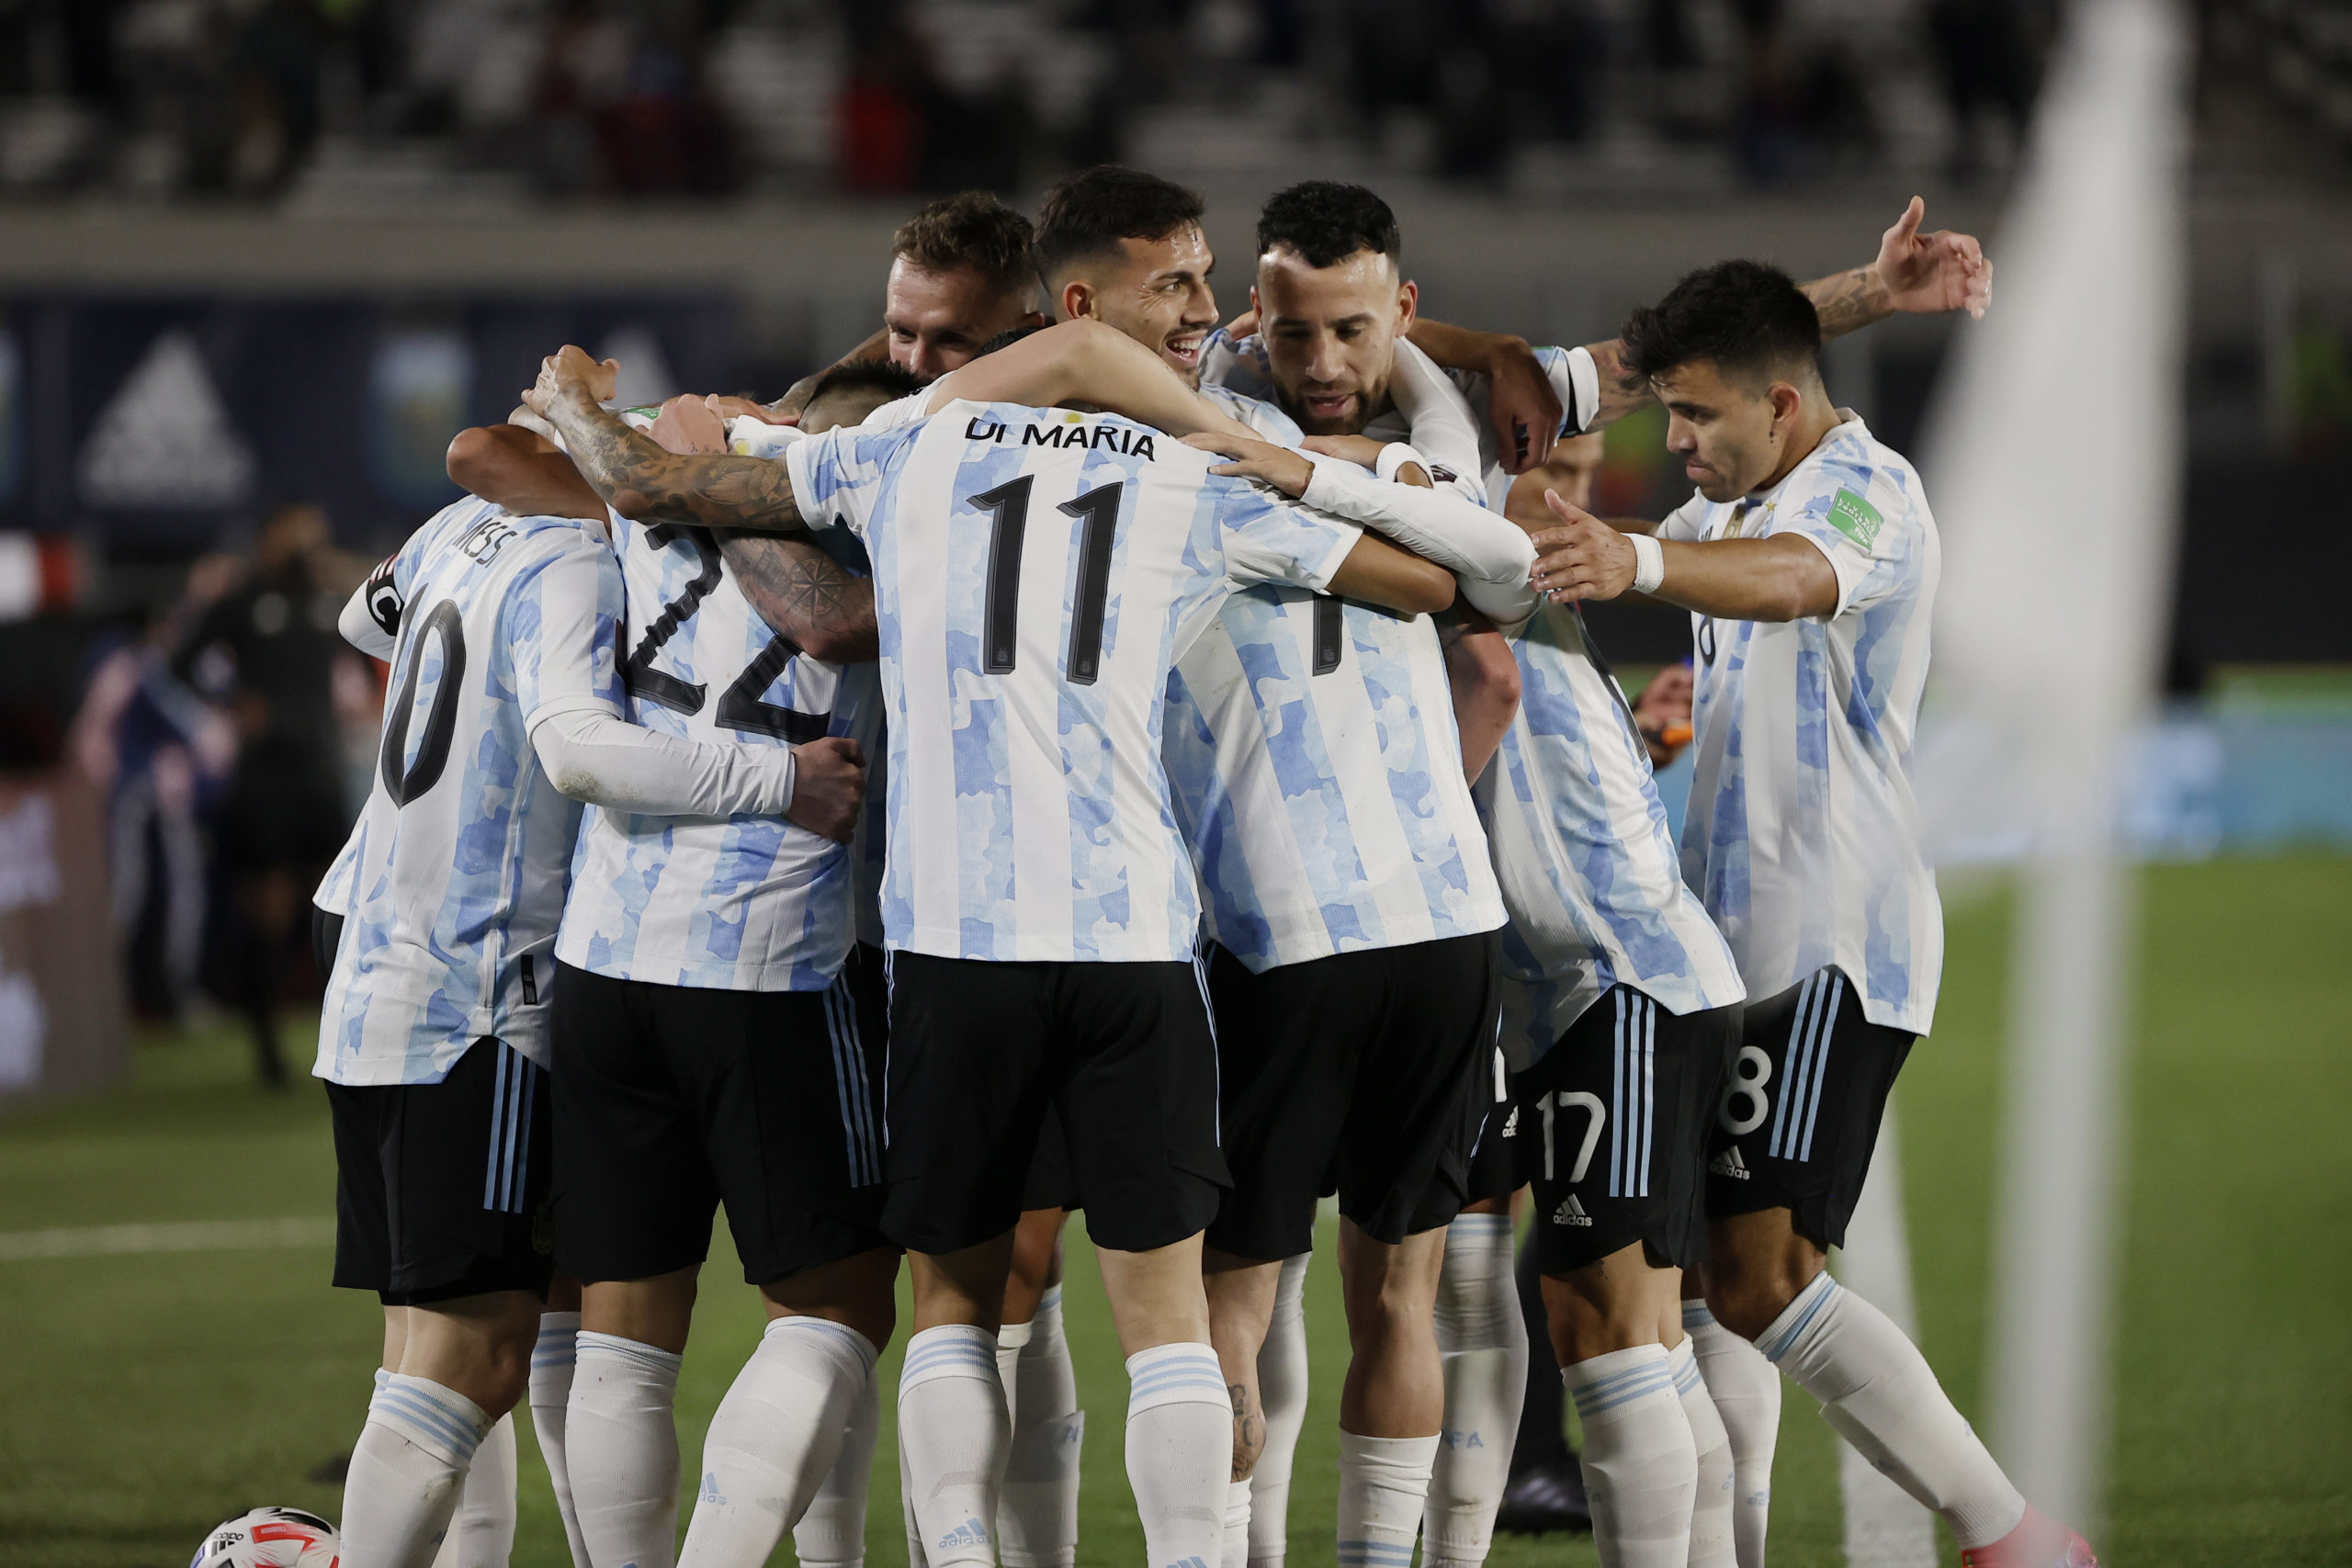 September 9, 2021 Argentina's Lionel Messi celebrates scoring their first goal with teammates Pool